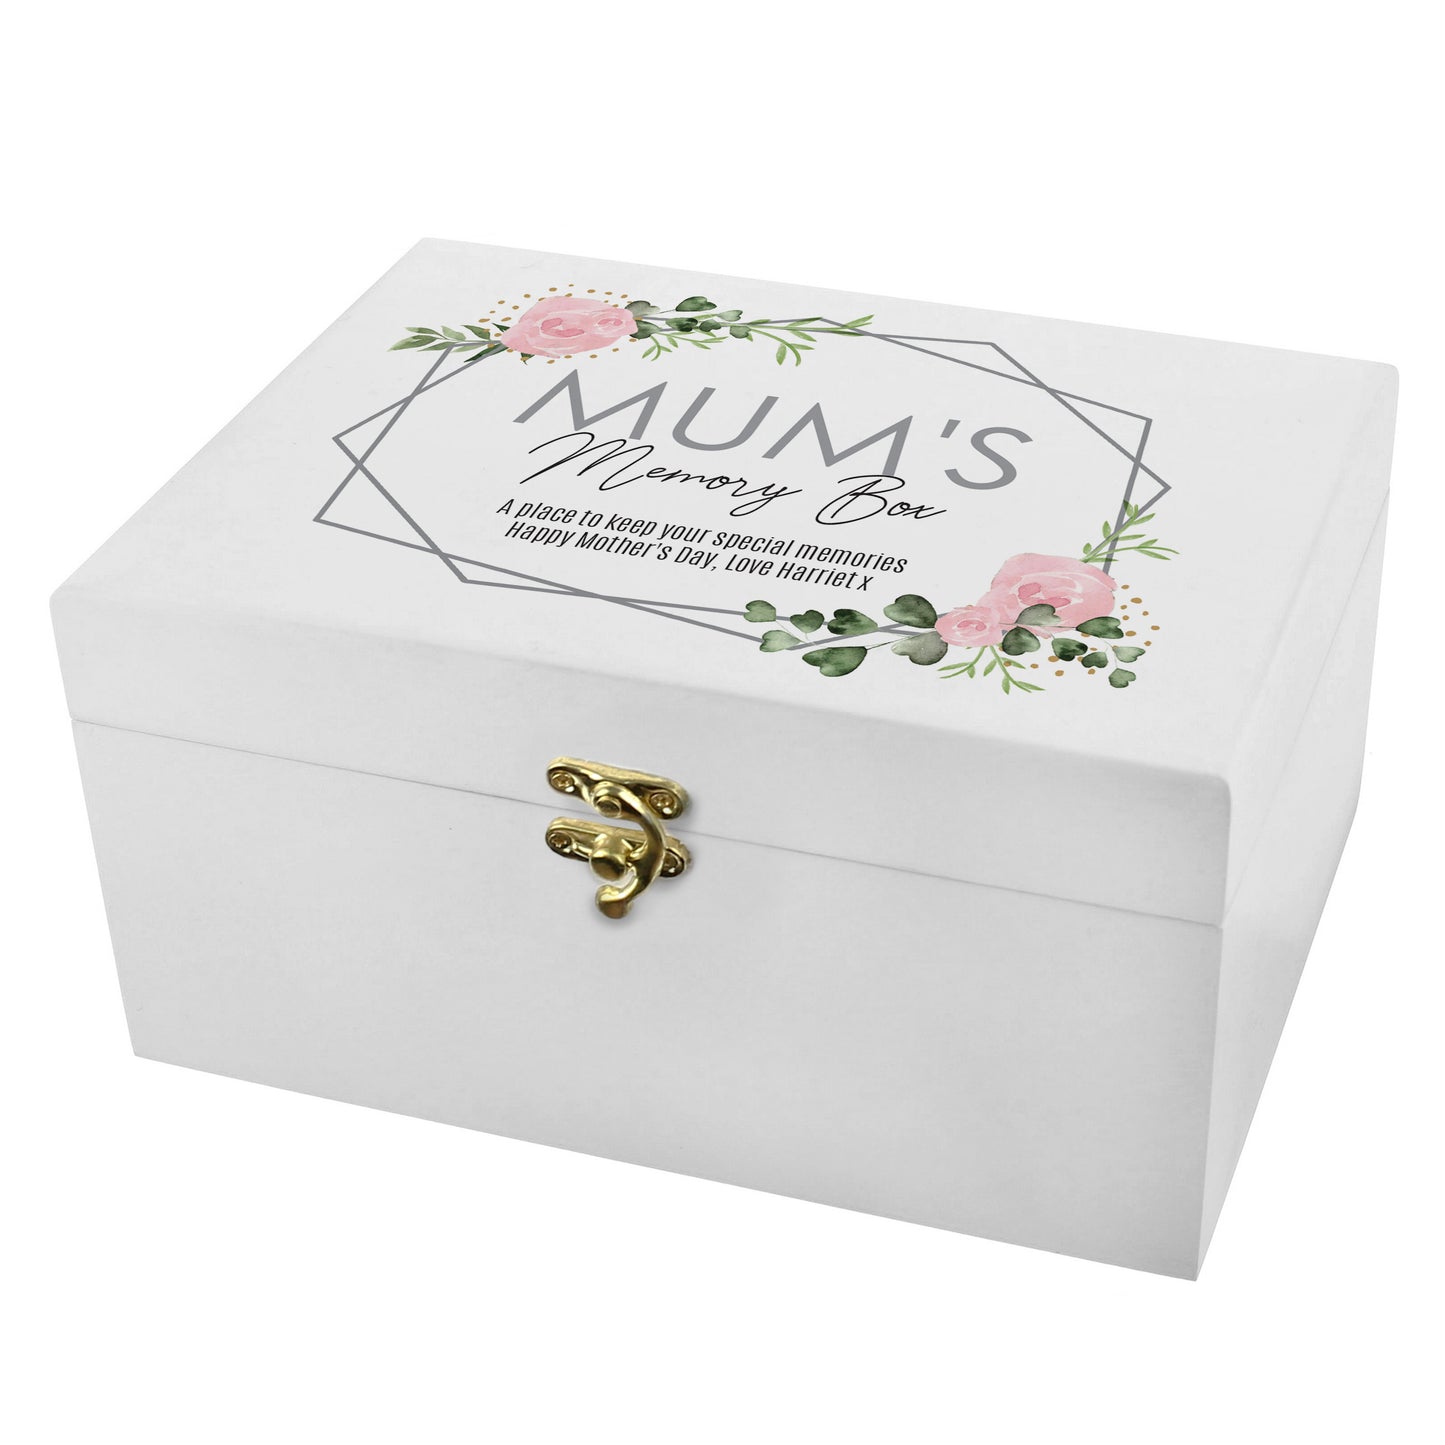 Personalised Abstract Rose White Wooden Keepsake Box - Personalise It!